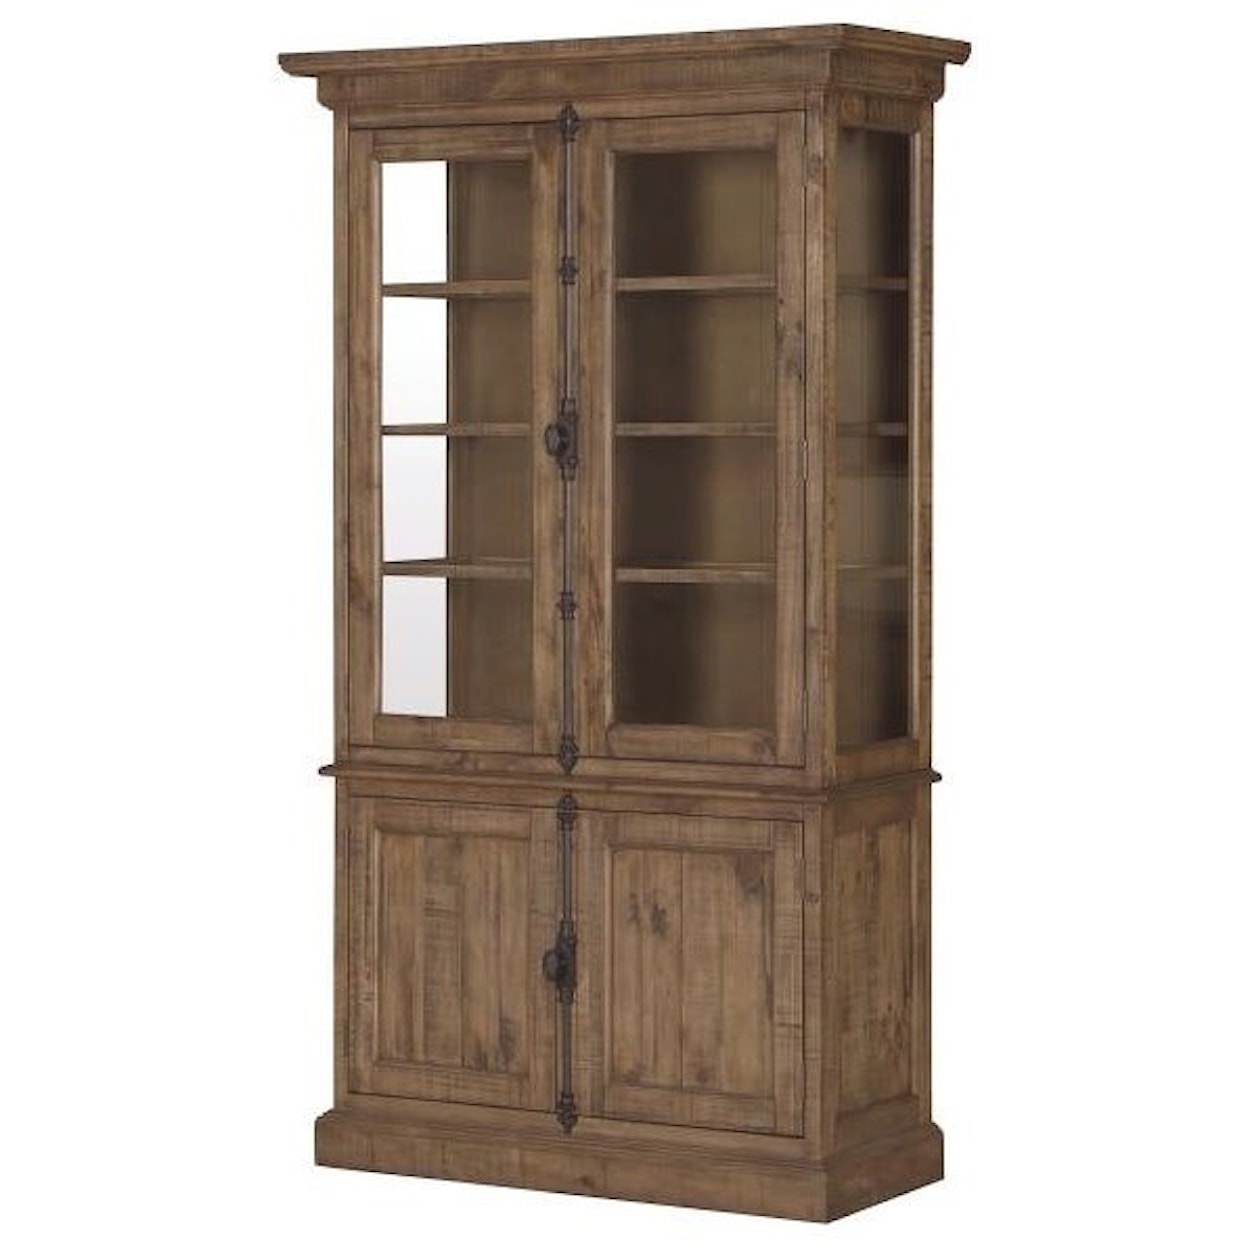 Magnussen Home Willoughby Dining Glass Door China Cabinet